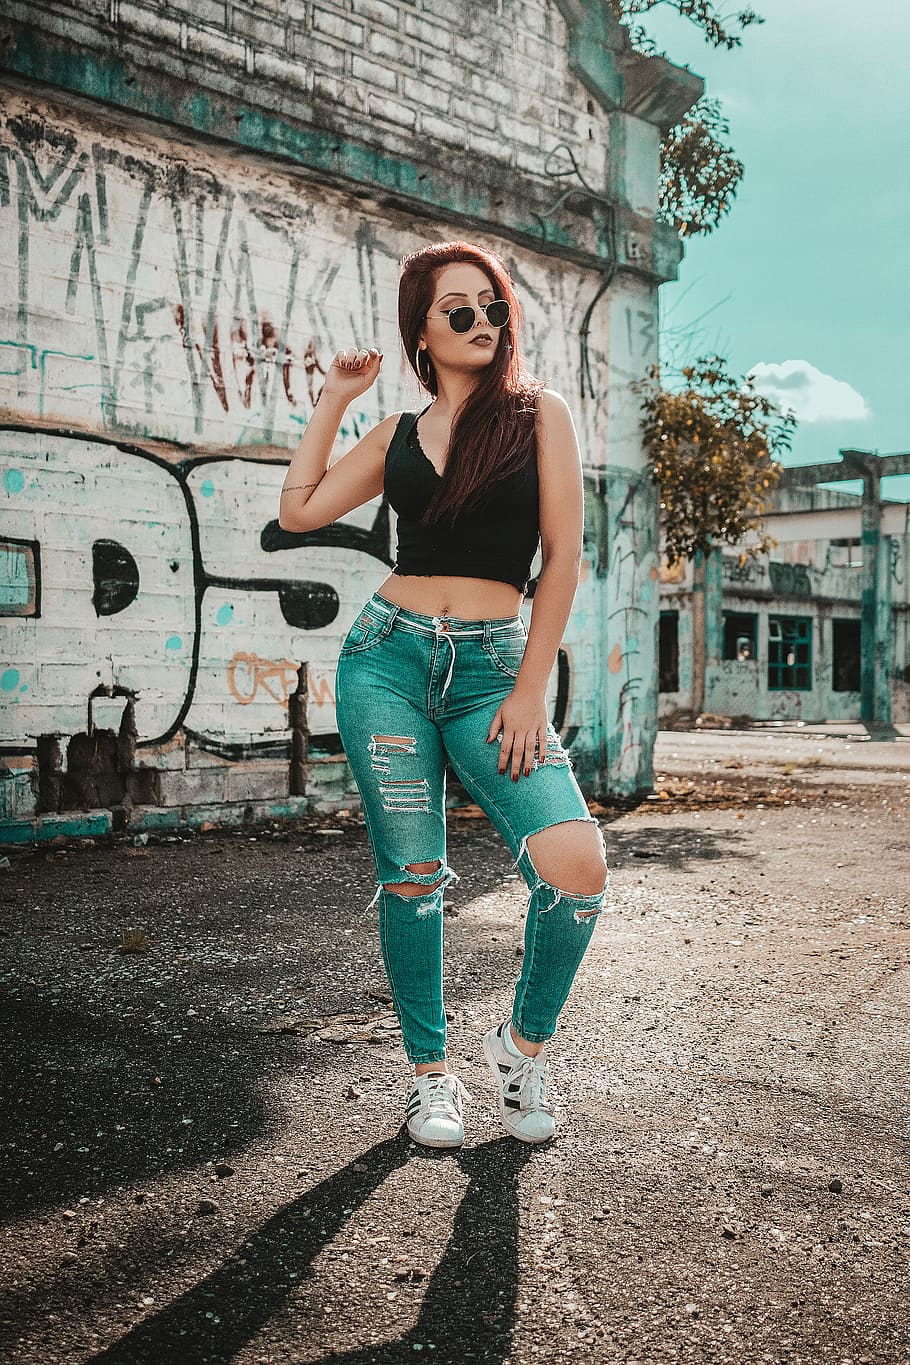 woman wearing black V-neck sleeveless top and distressed blue denim pants outfit while taking photo, woman standing near concrete building during daytime, HD wallpaper